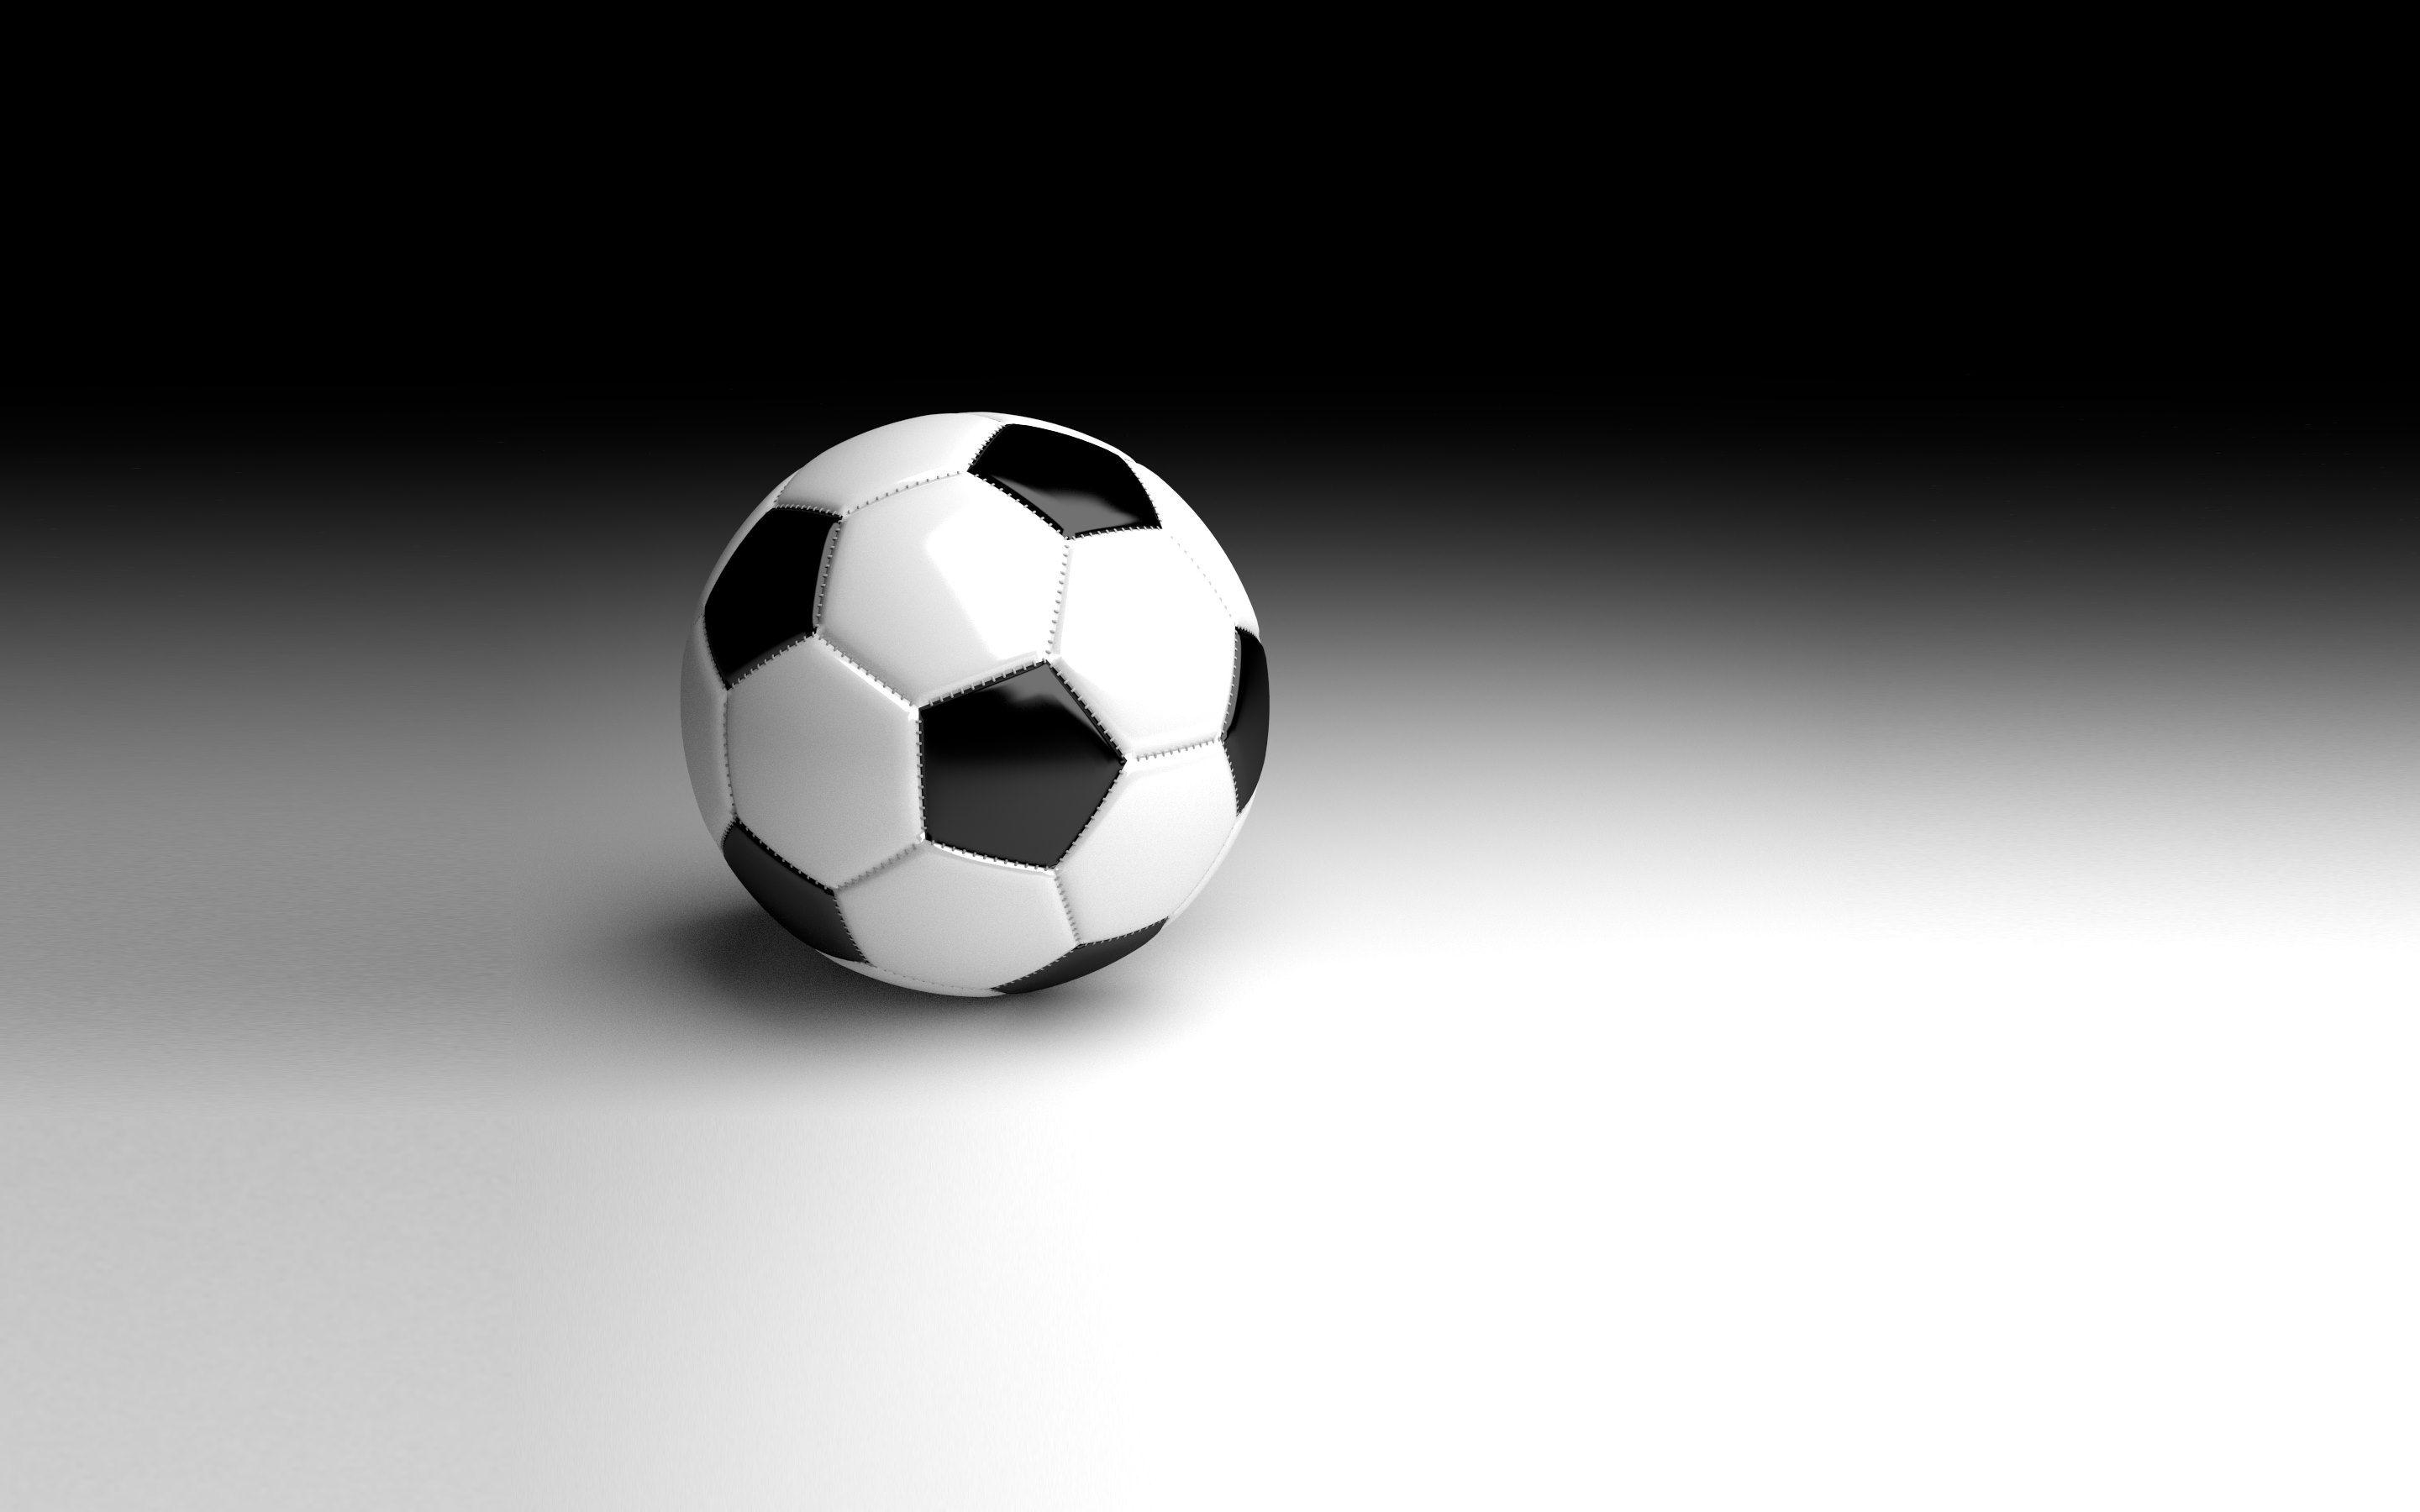 Soccer Balls Wallpaper in HD, 4K and wide sizes